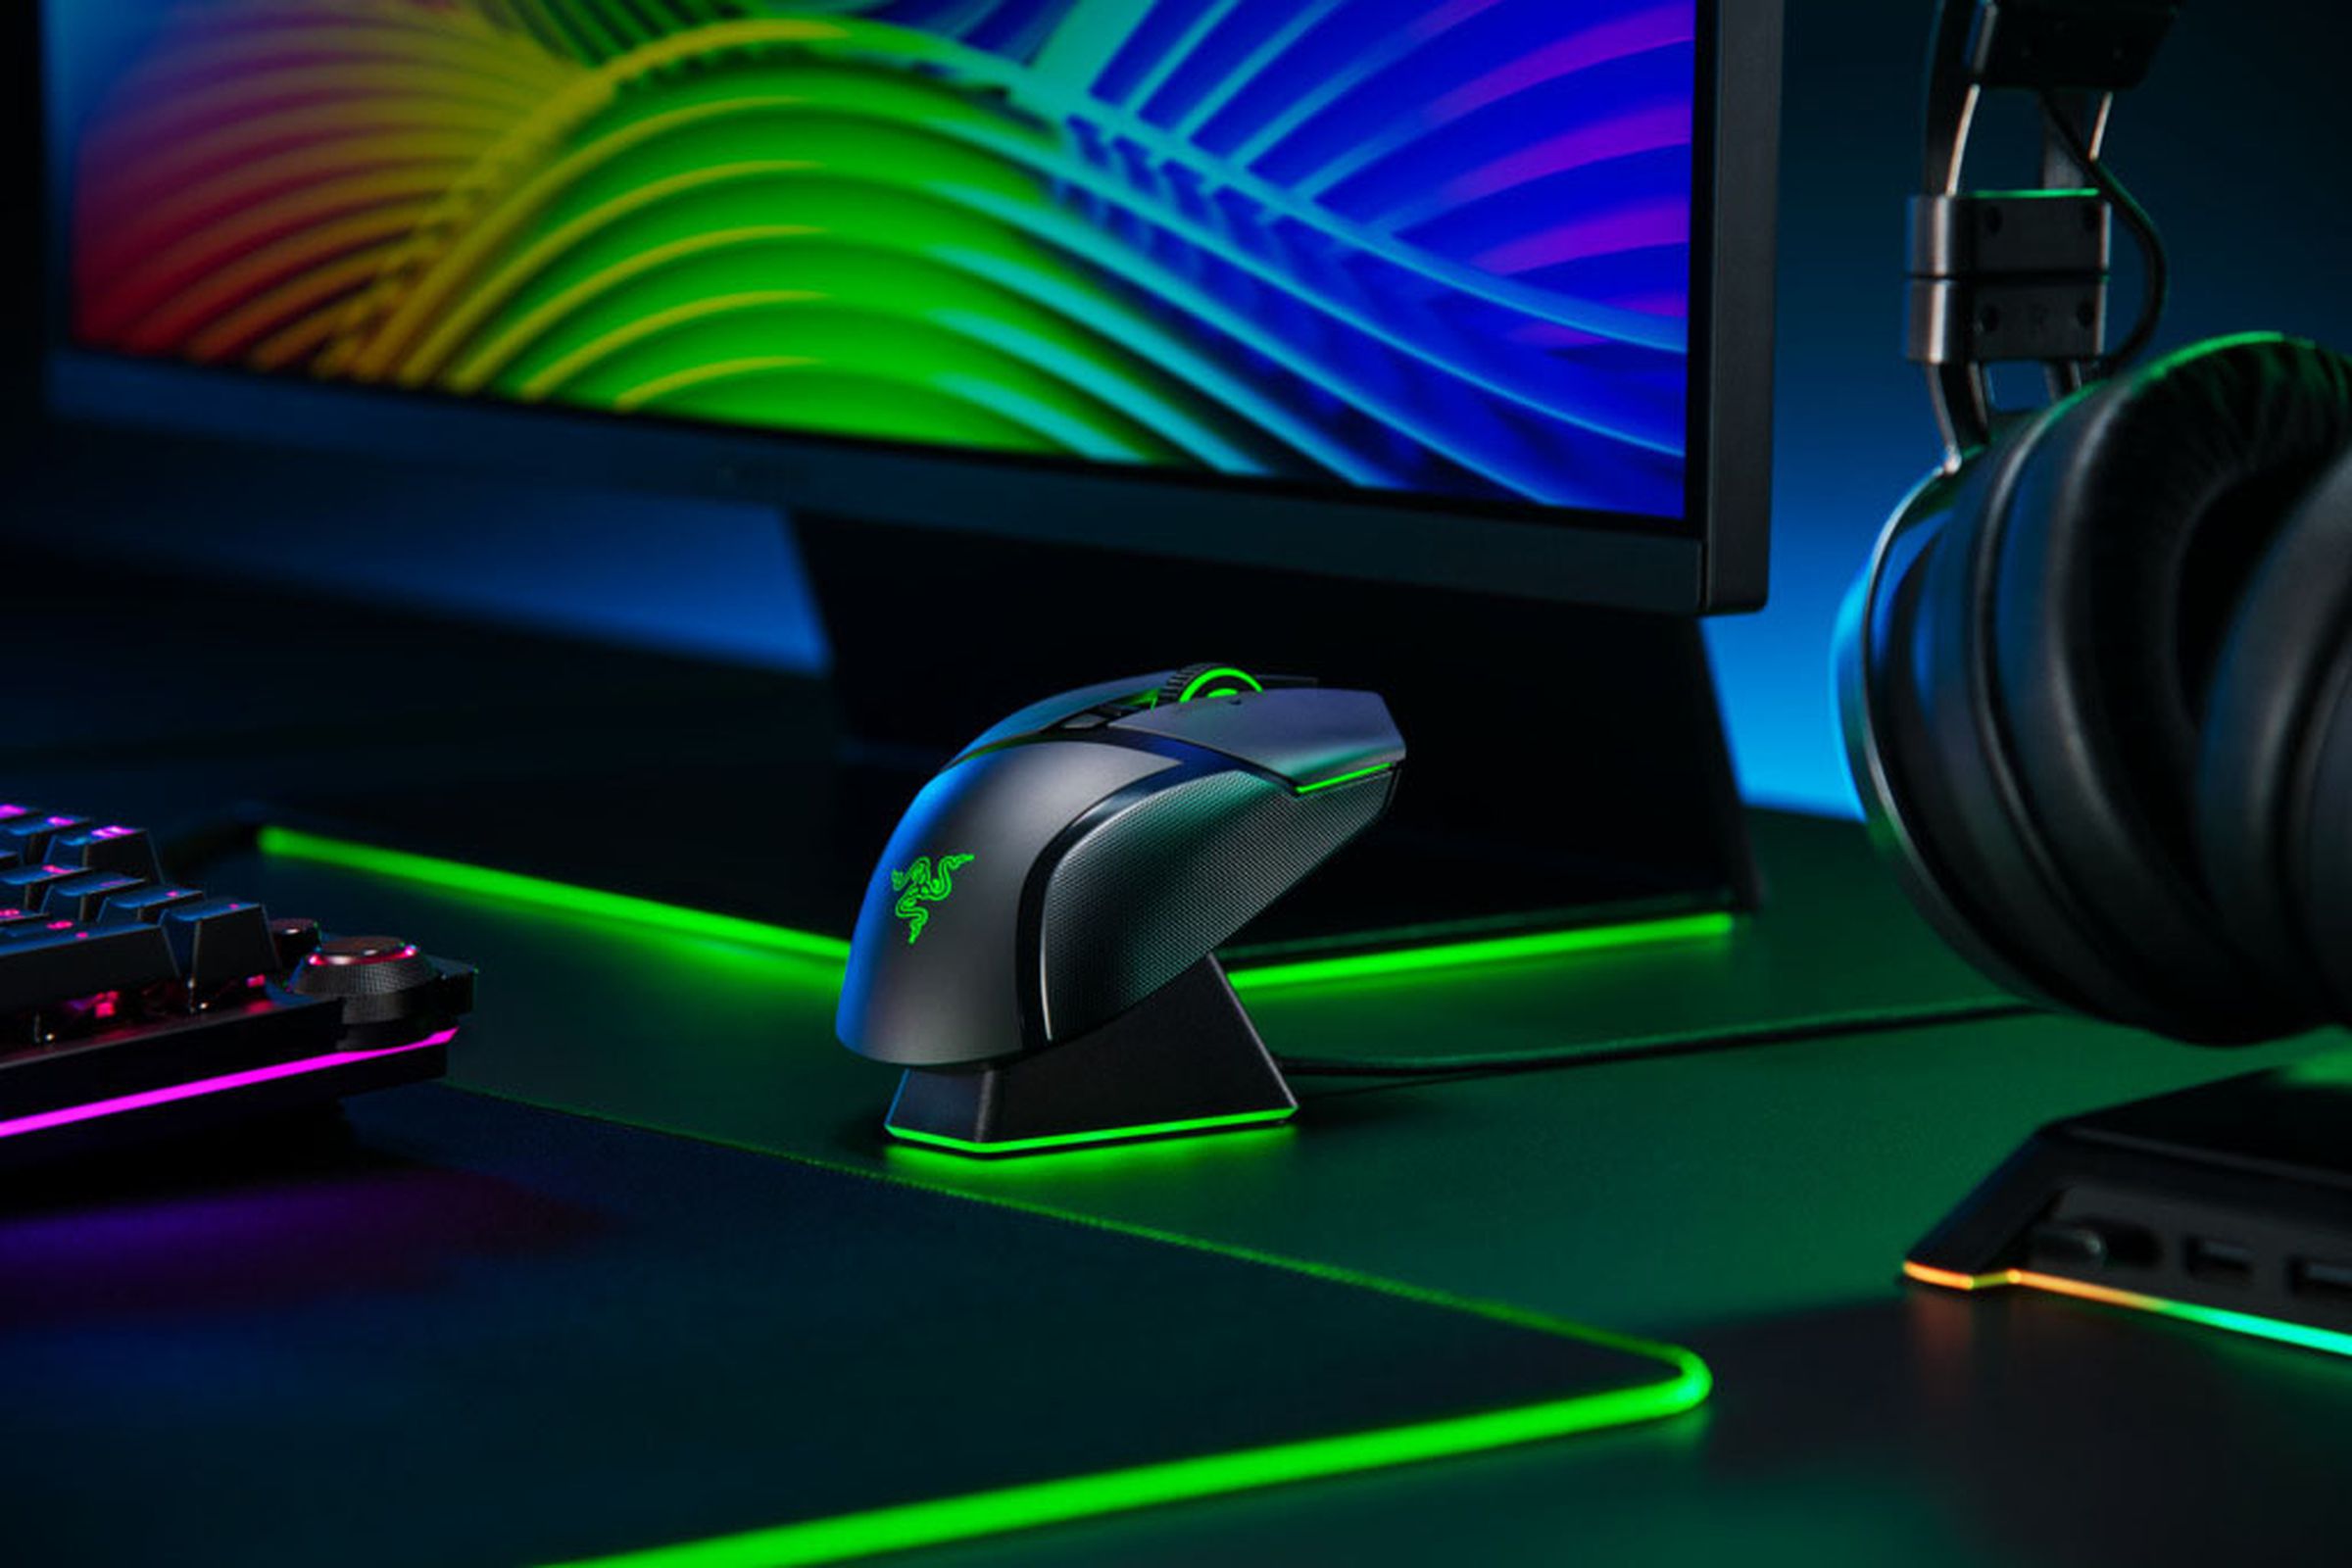 Razer products offer a lot for those that love RGB accent lighting, with software to sync it all together.